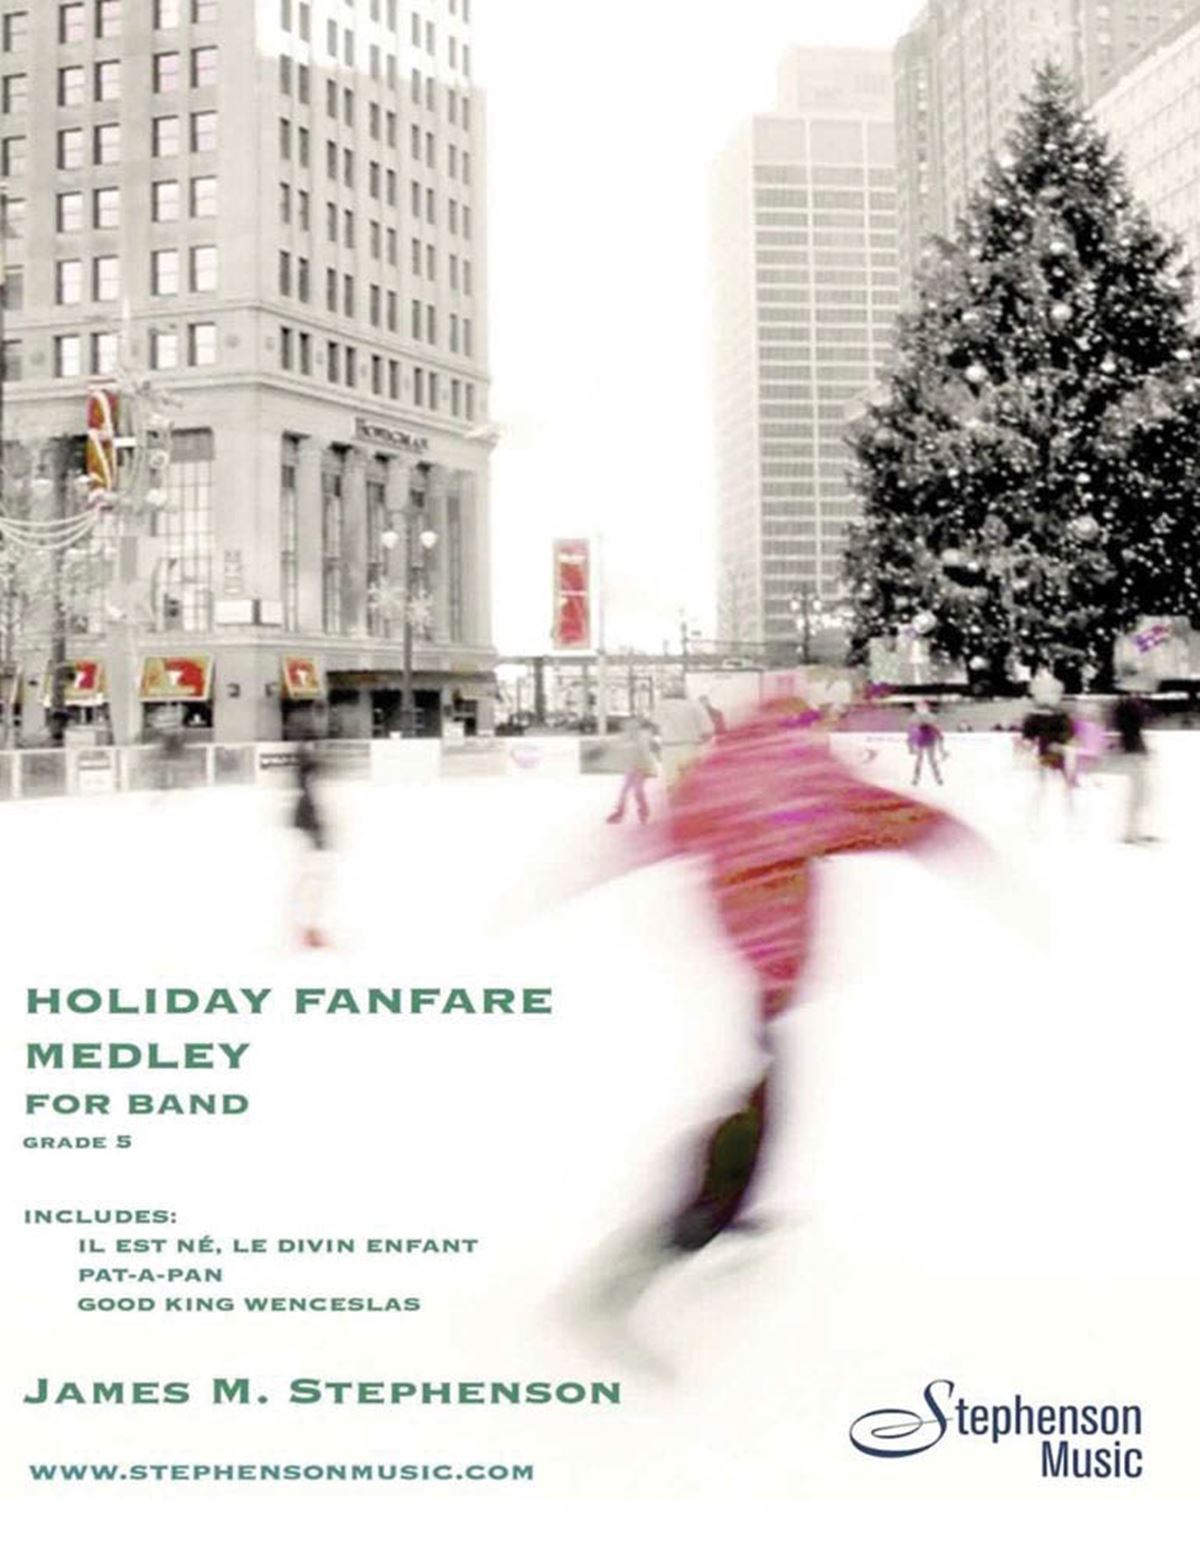 Jim Stephenson: Holiday Fanfare Medley: Concert Band: Score and Parts